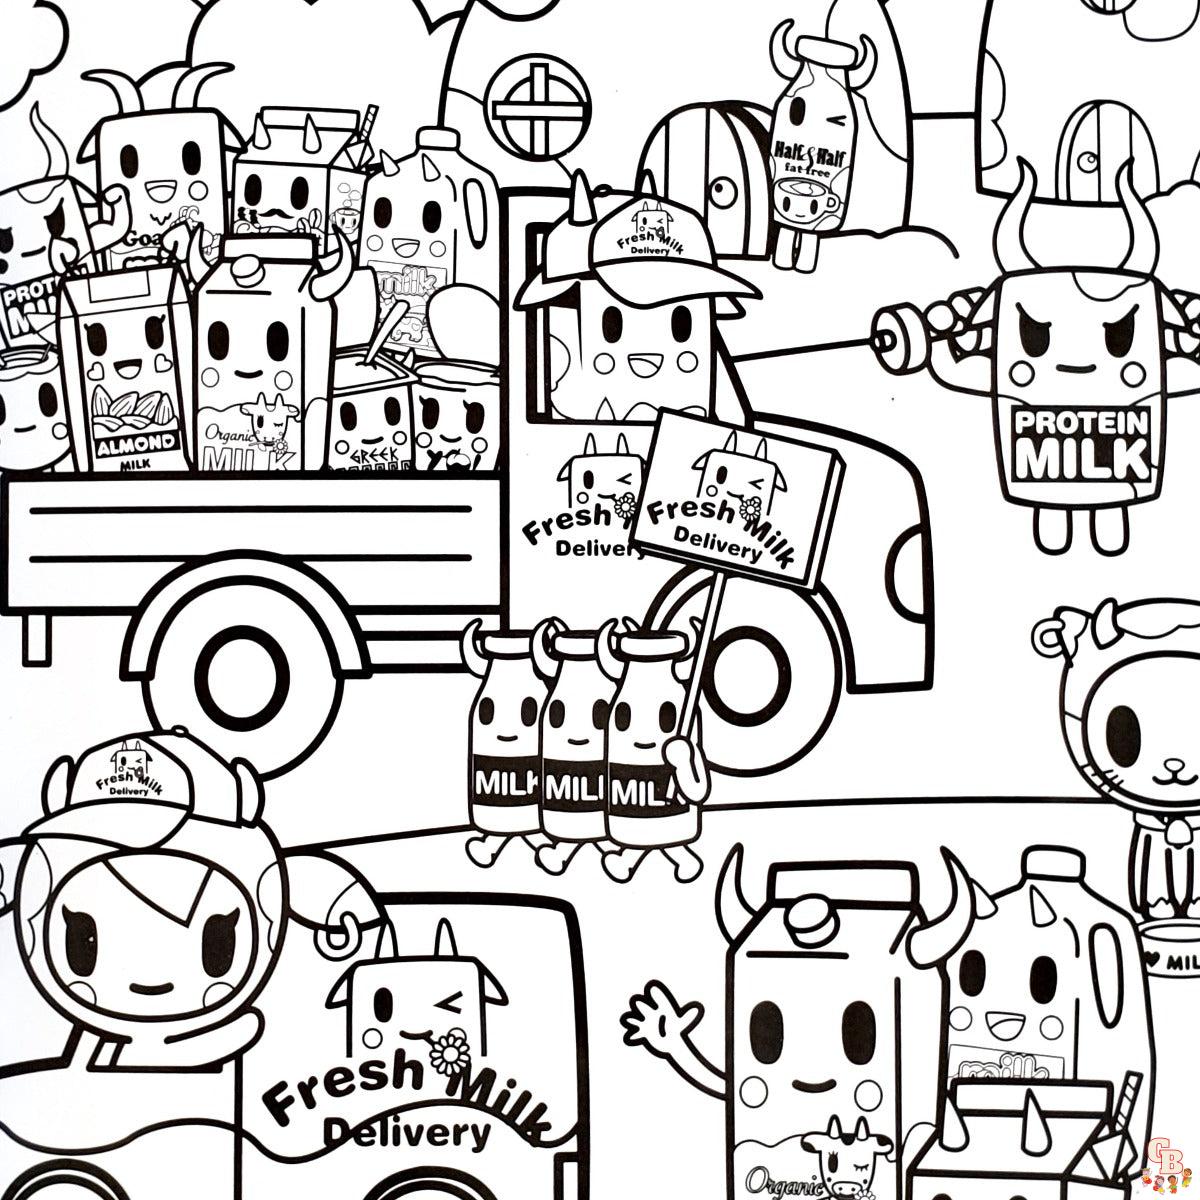 https://gbcoloring.com/wp-content/uploads/2023/04/tokidoki-coloring-pages-9.jpg